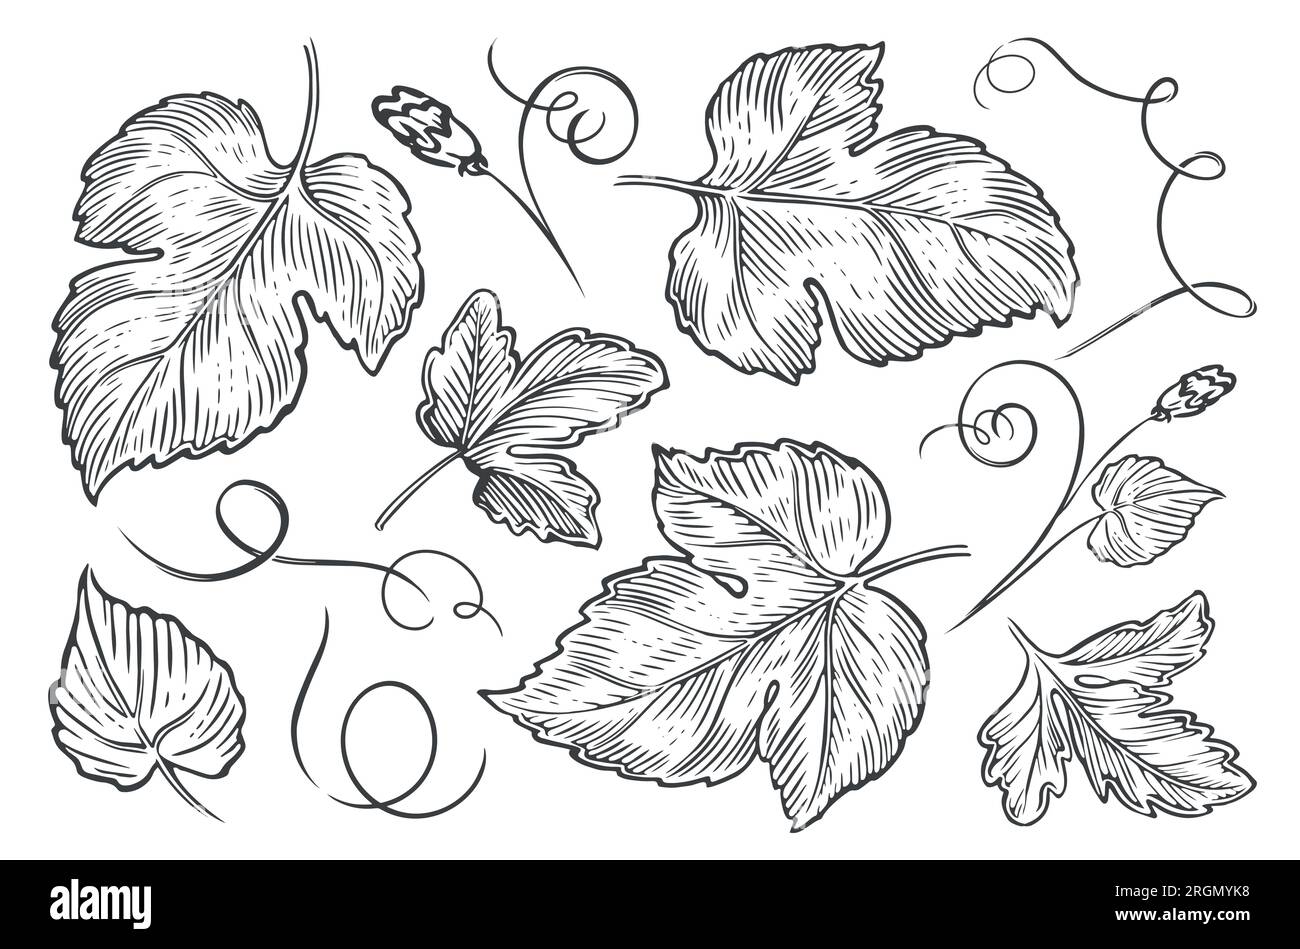 Plant leaves, flowers and tendrils set. Nature concept. Sketch vintage vector illustration Stock Vector